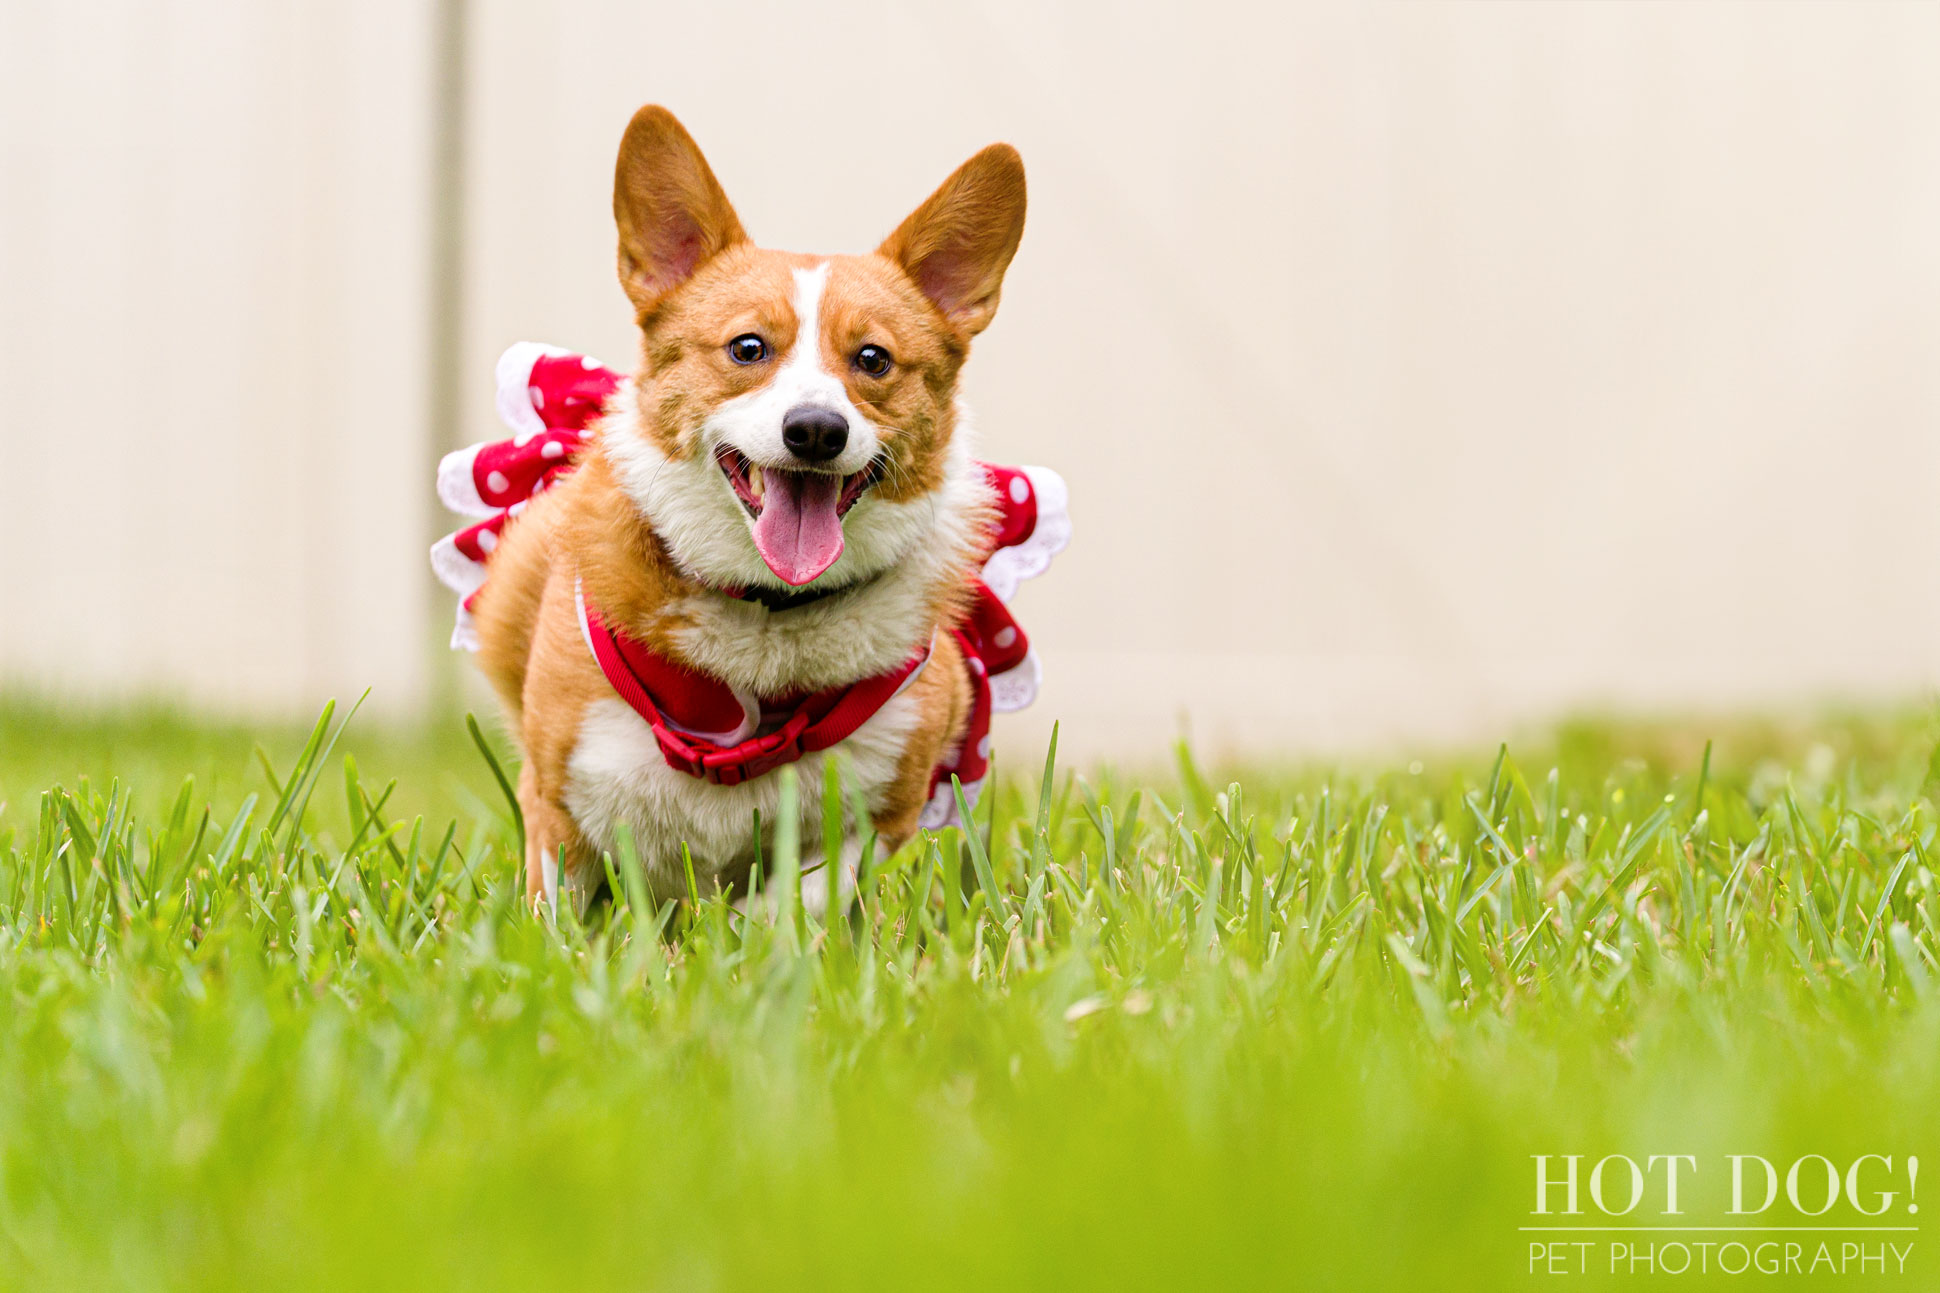 Hot Dog! Pet Photography is the premier pet photography studio in the area, and this photo session with Cinnamon the Pembroke Welsh Corgi is proof of their talent.